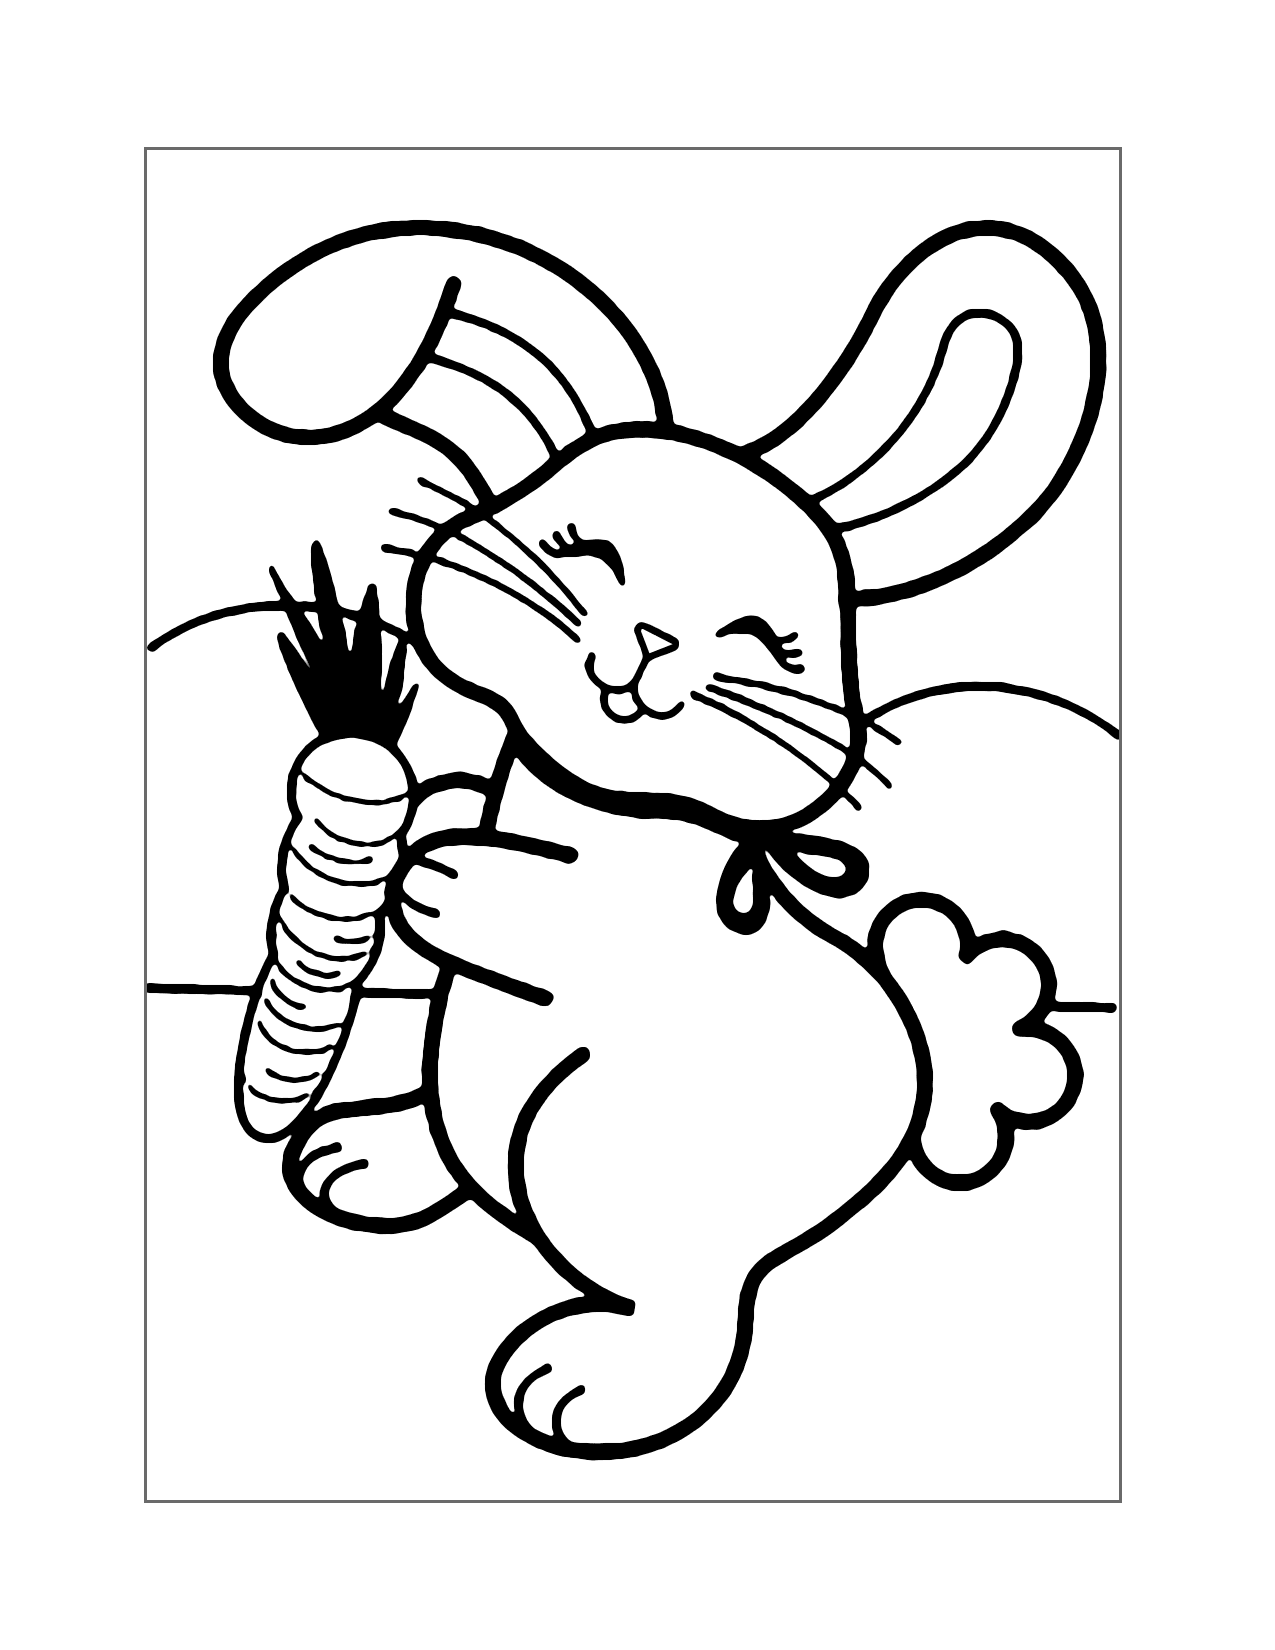 Cute Cartoon Rabbit With Carrot Coloring Page